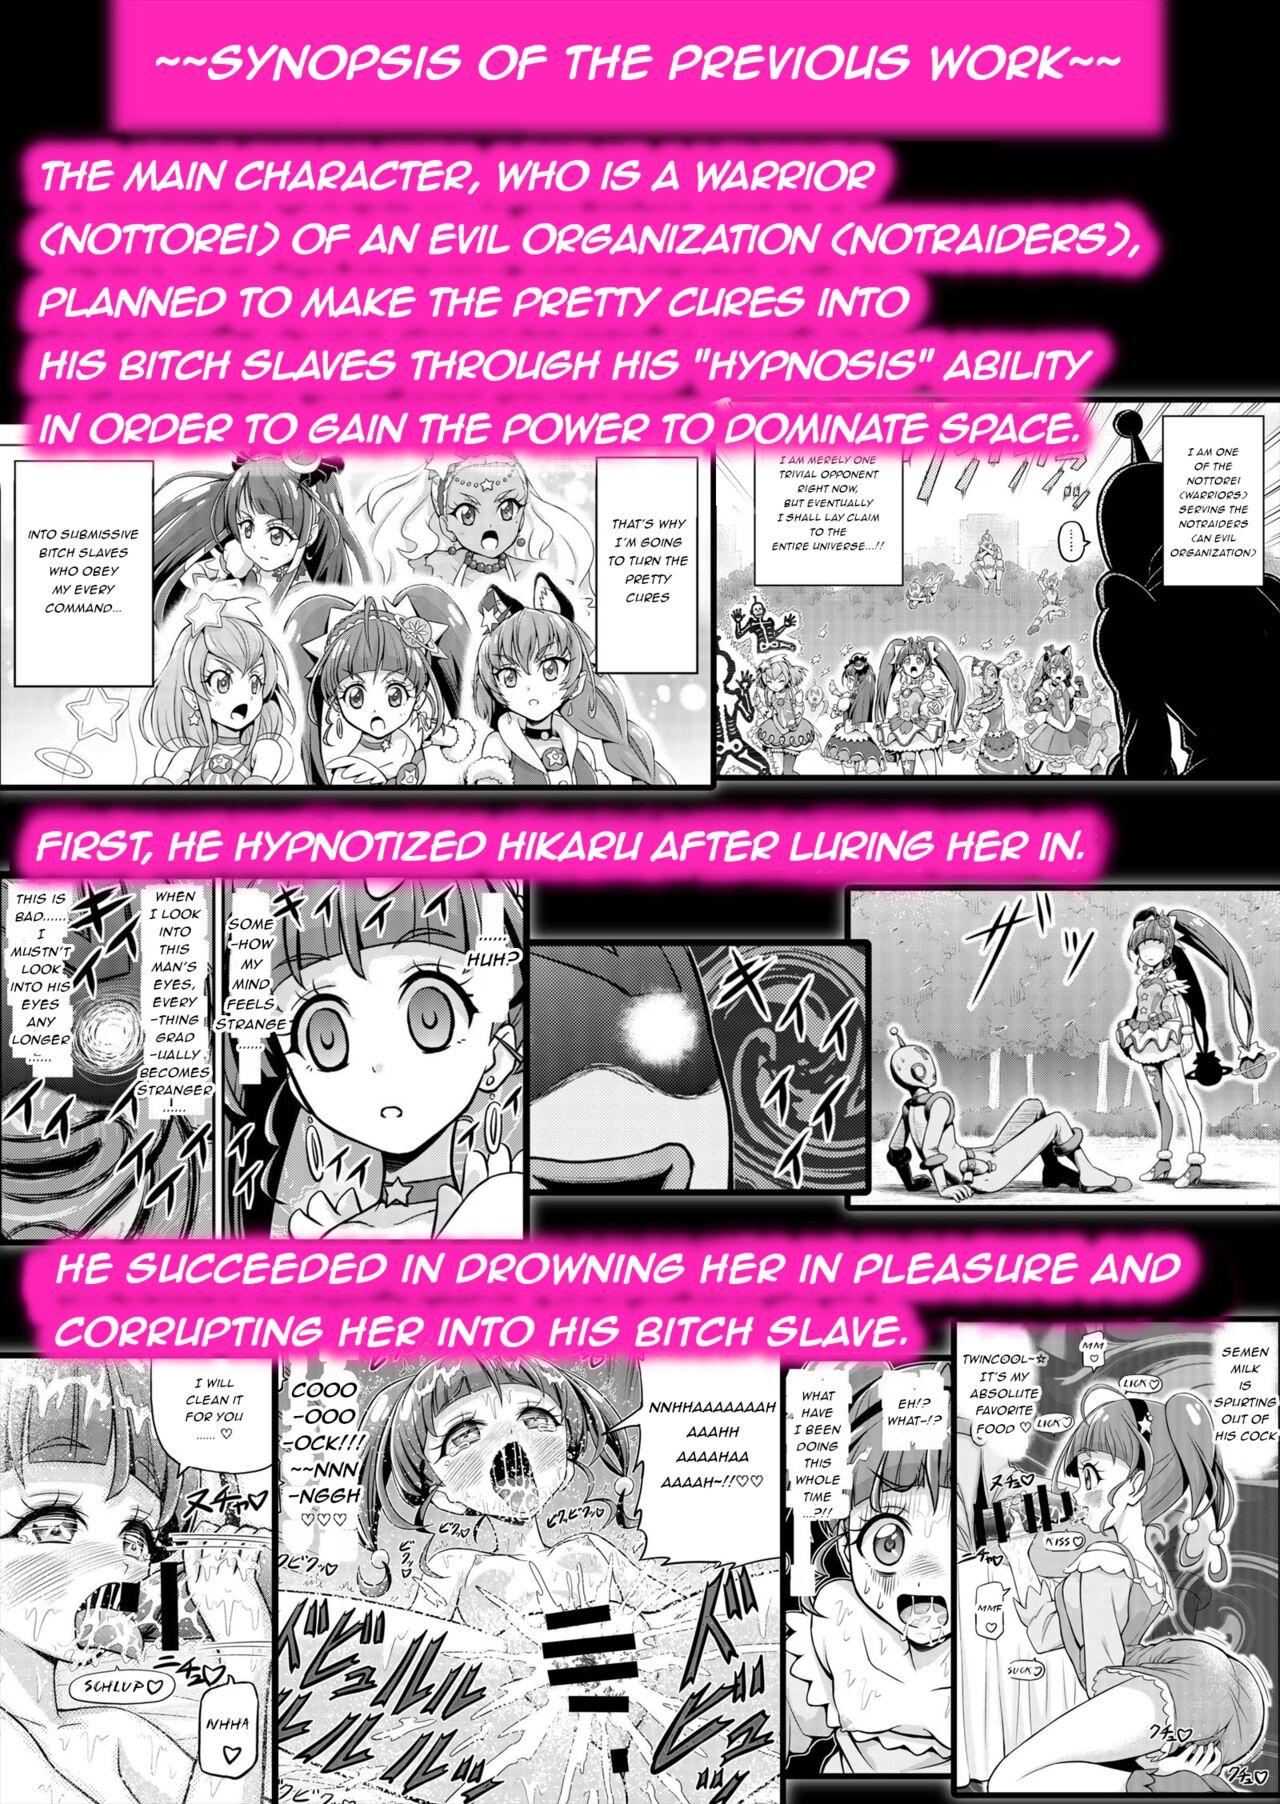 Casal Hoshi Asobi 2 | Star Playtime 2 Ch. 1-3 - Star twinkle precure Gay Blondhair - Page 2